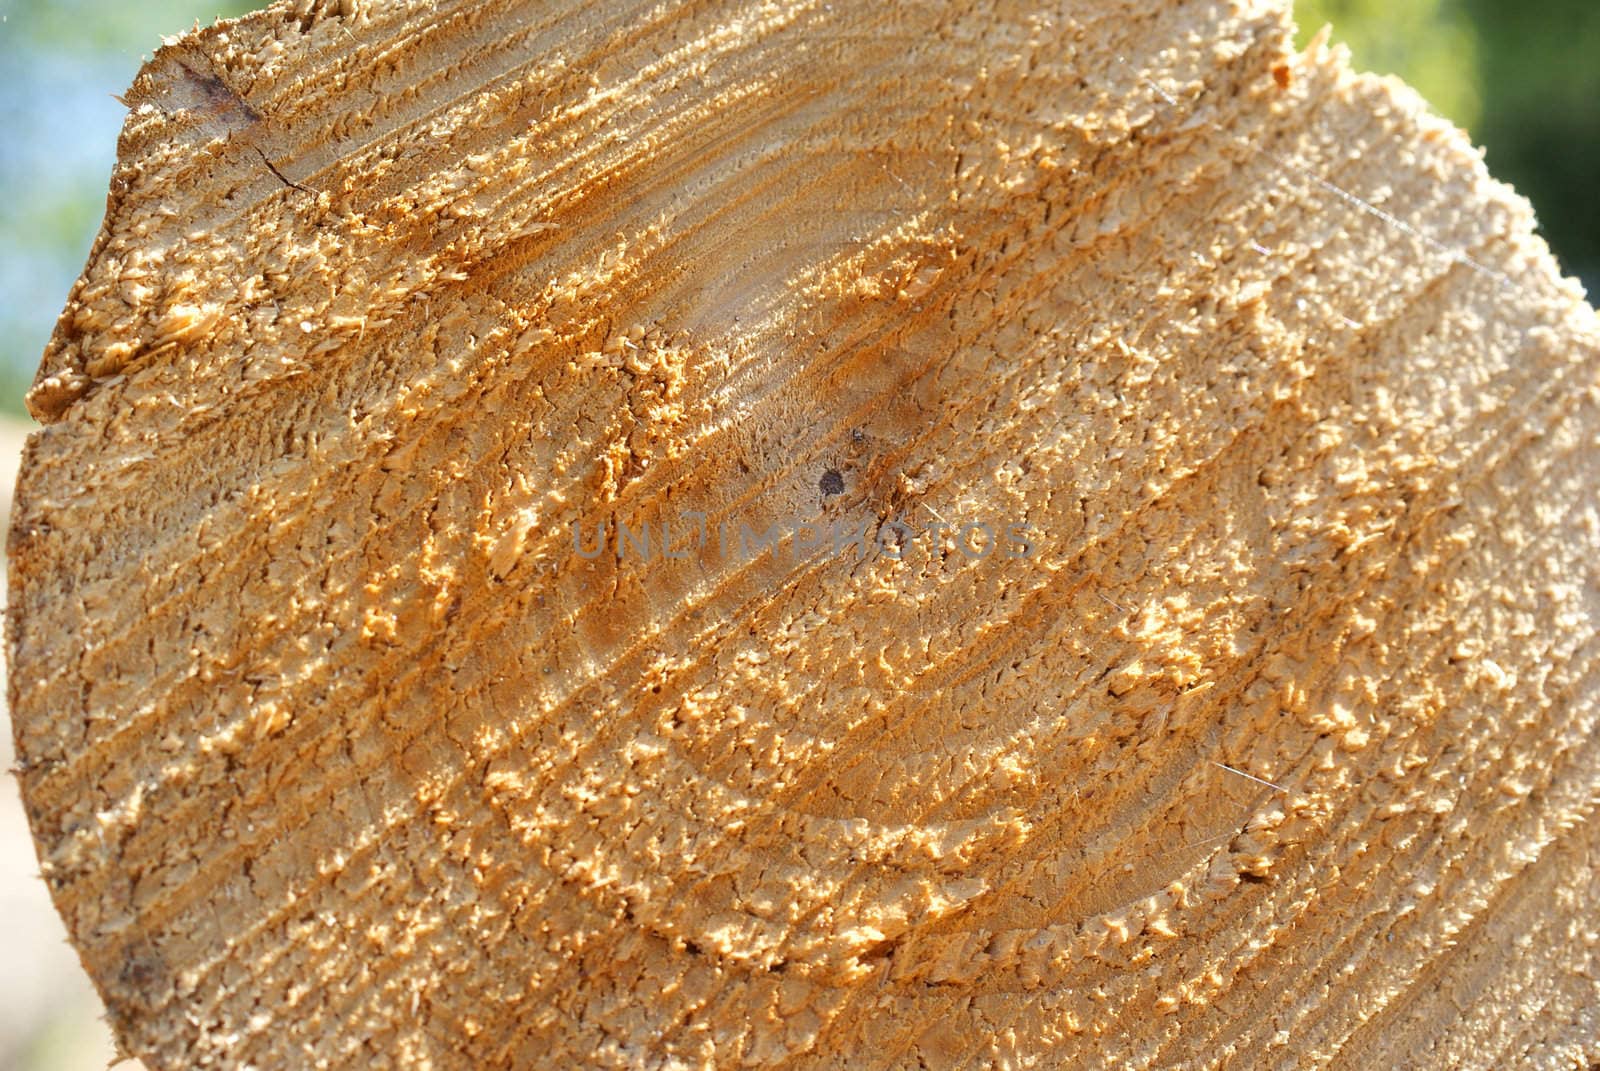 End of a birch log close up showing the texture and growth rings. Photographed in Salo, Finland in May 2010.